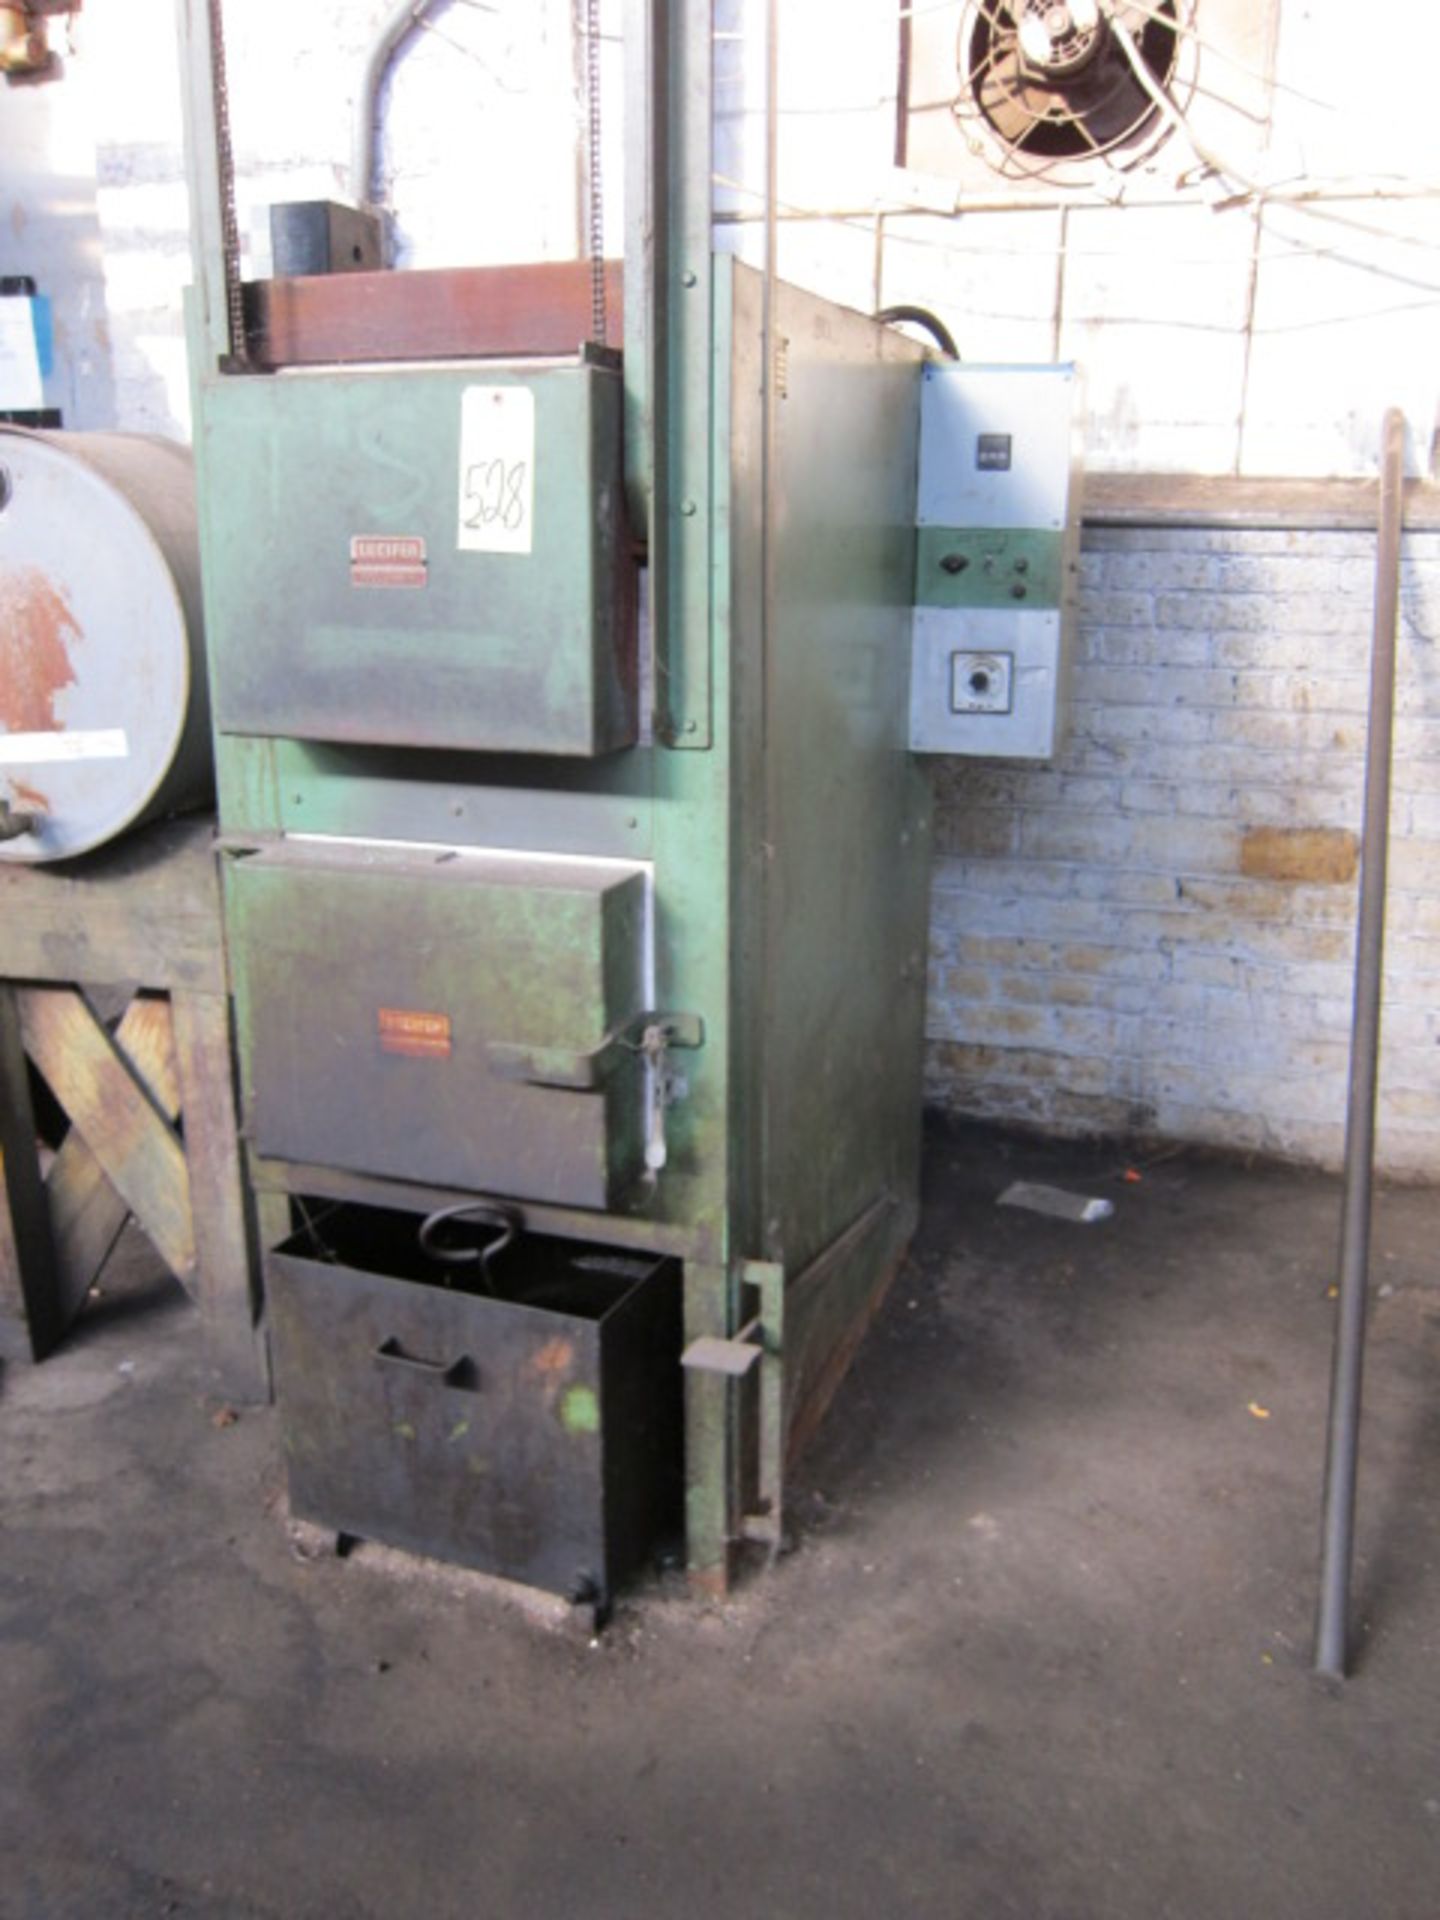 FURNACE, LUCIFER MDL. 8012, 2,300 deg. F. max. temp. on upper, tempering oven w/lower tempering